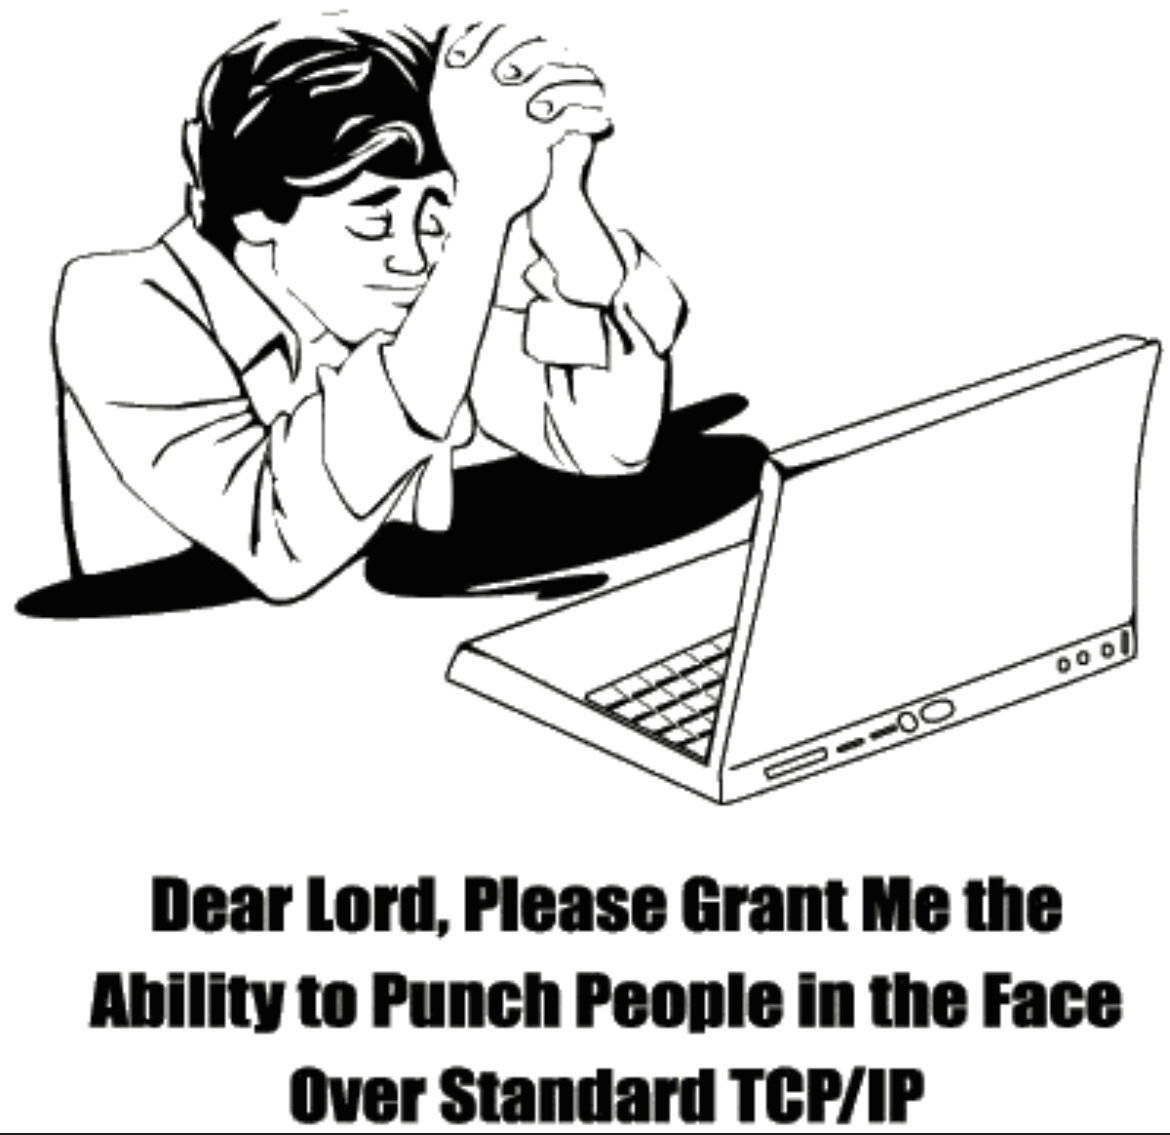 drawing of a person with the text below in an impact font stating “Dear Lord, Please Grant Me the Ability to Punch People in the Face Over Standard TCP/IP.”